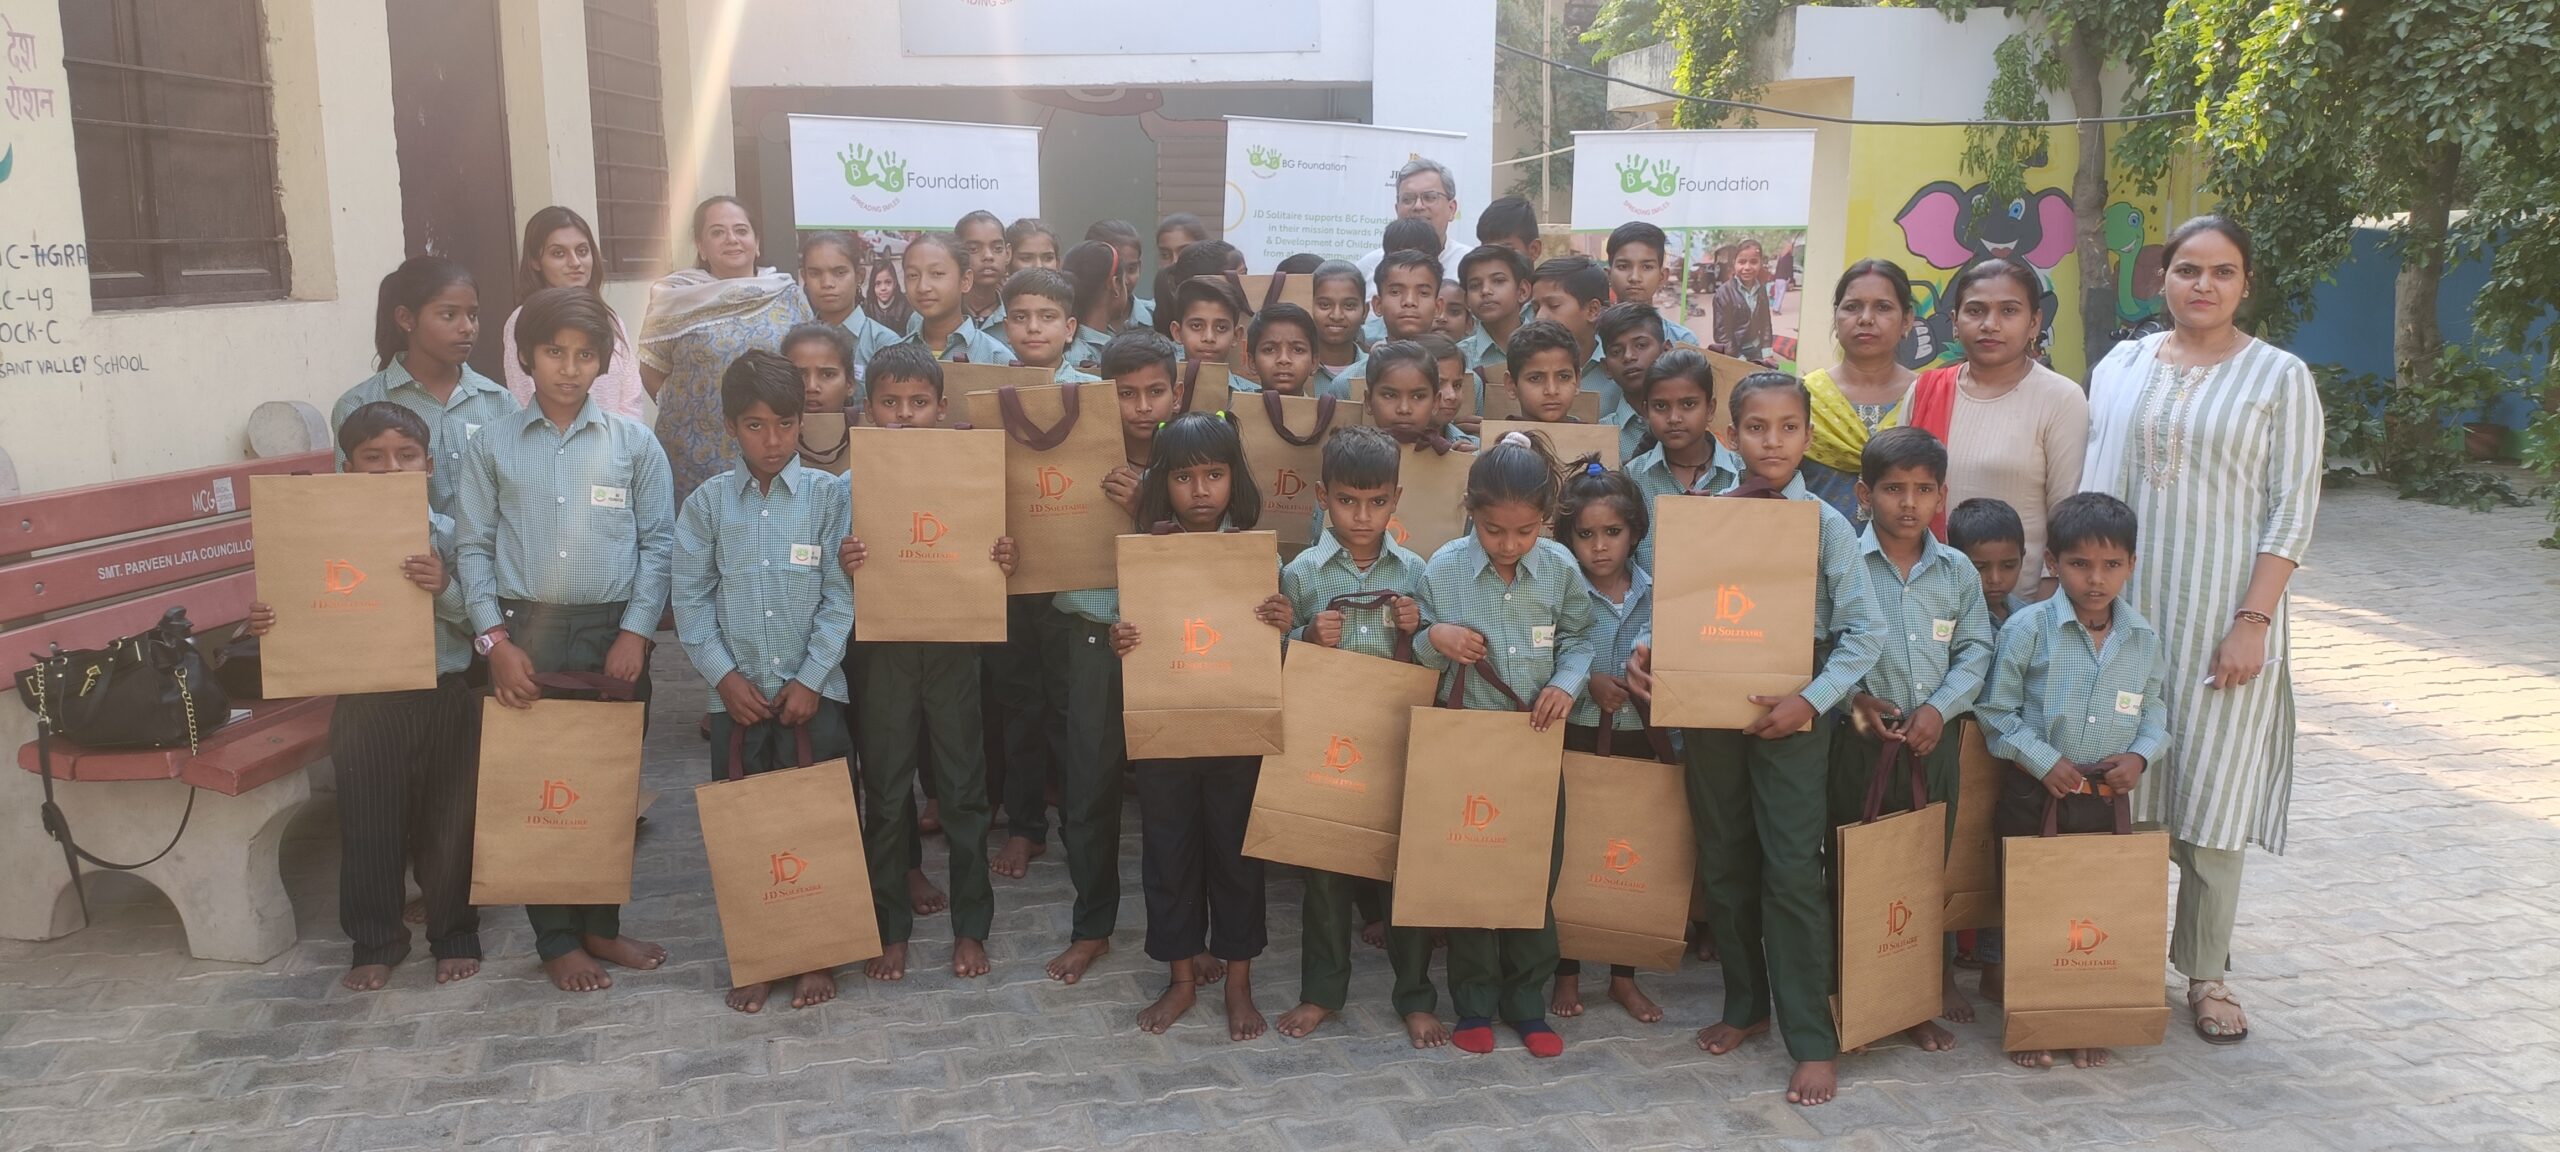 How BG Foundation is Making a Difference in Gurgaon’s Society